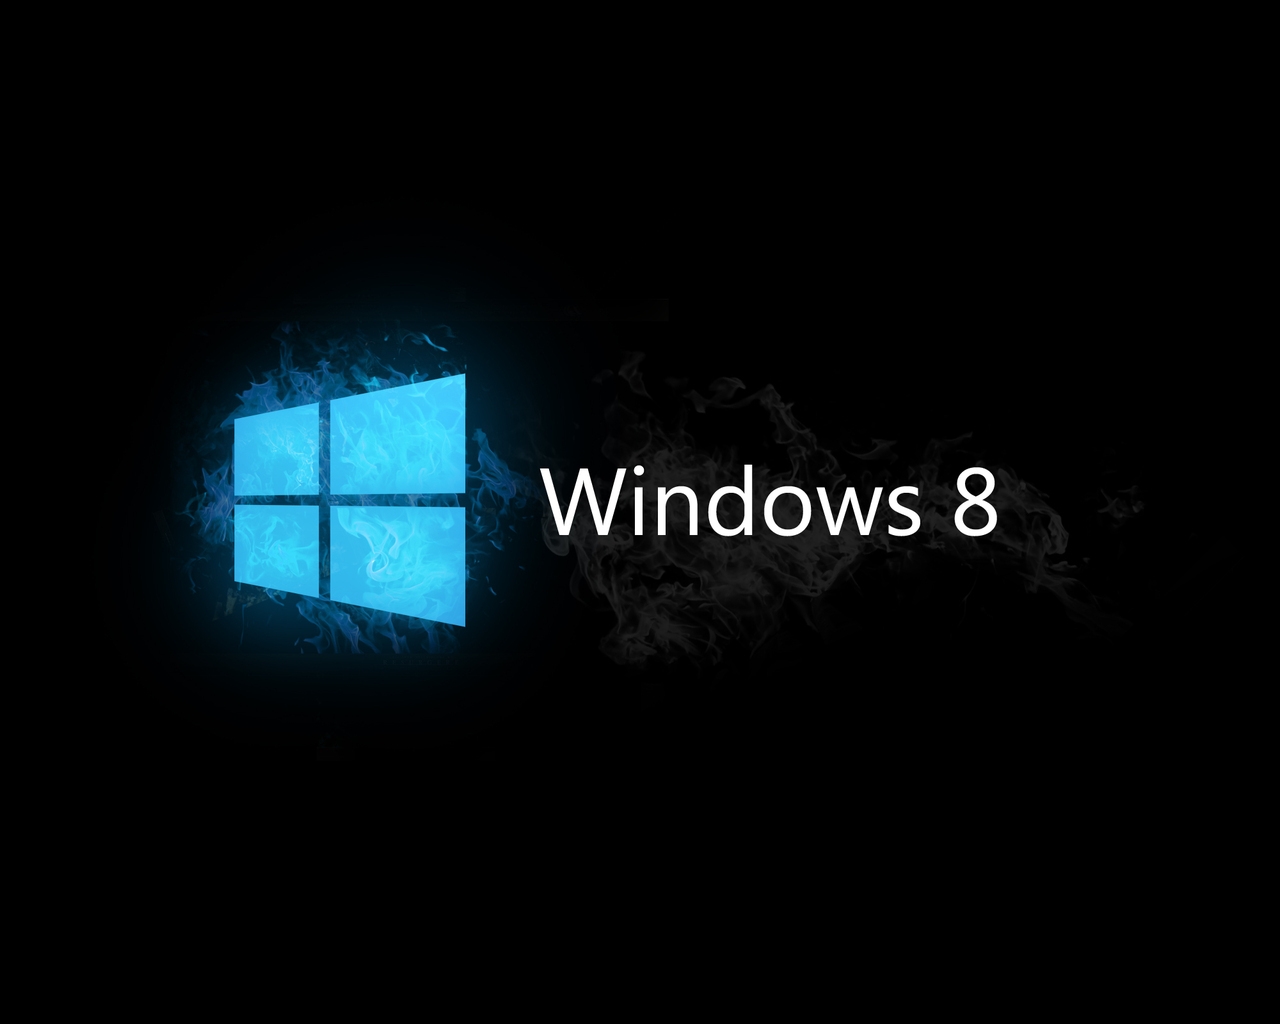 Windows 8 Blue and Black for 1280 x 1024 resolution